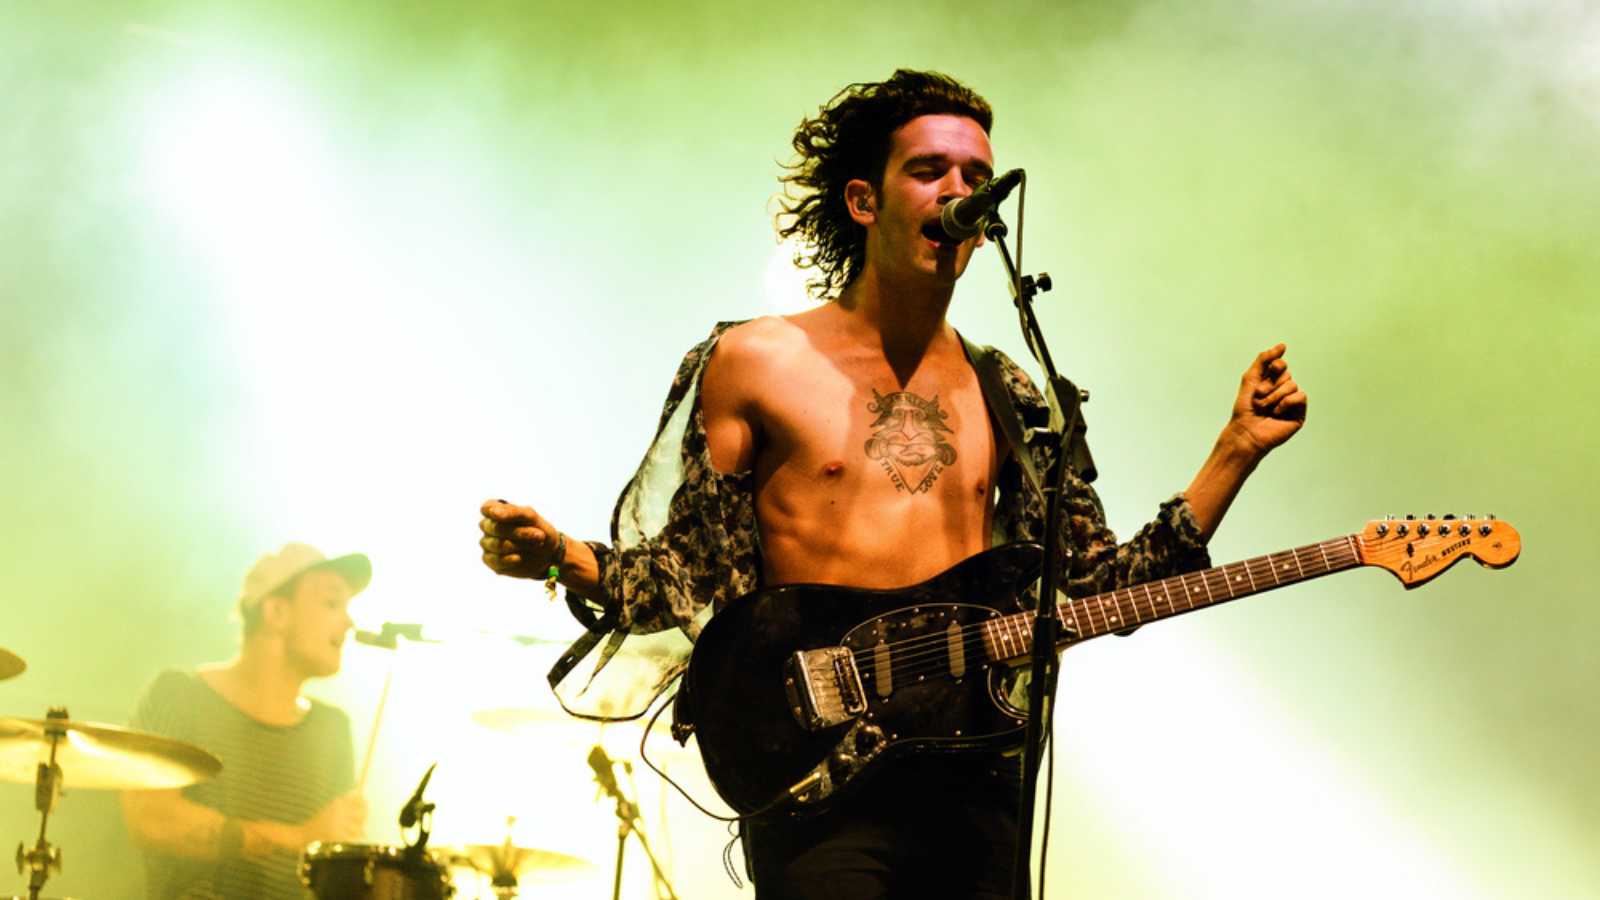 BENICASSIM, SPAIN - JULY 19: The 1975 (band) in concert at FIB Festival on July 19, 2014 in Benicassim, Spain.